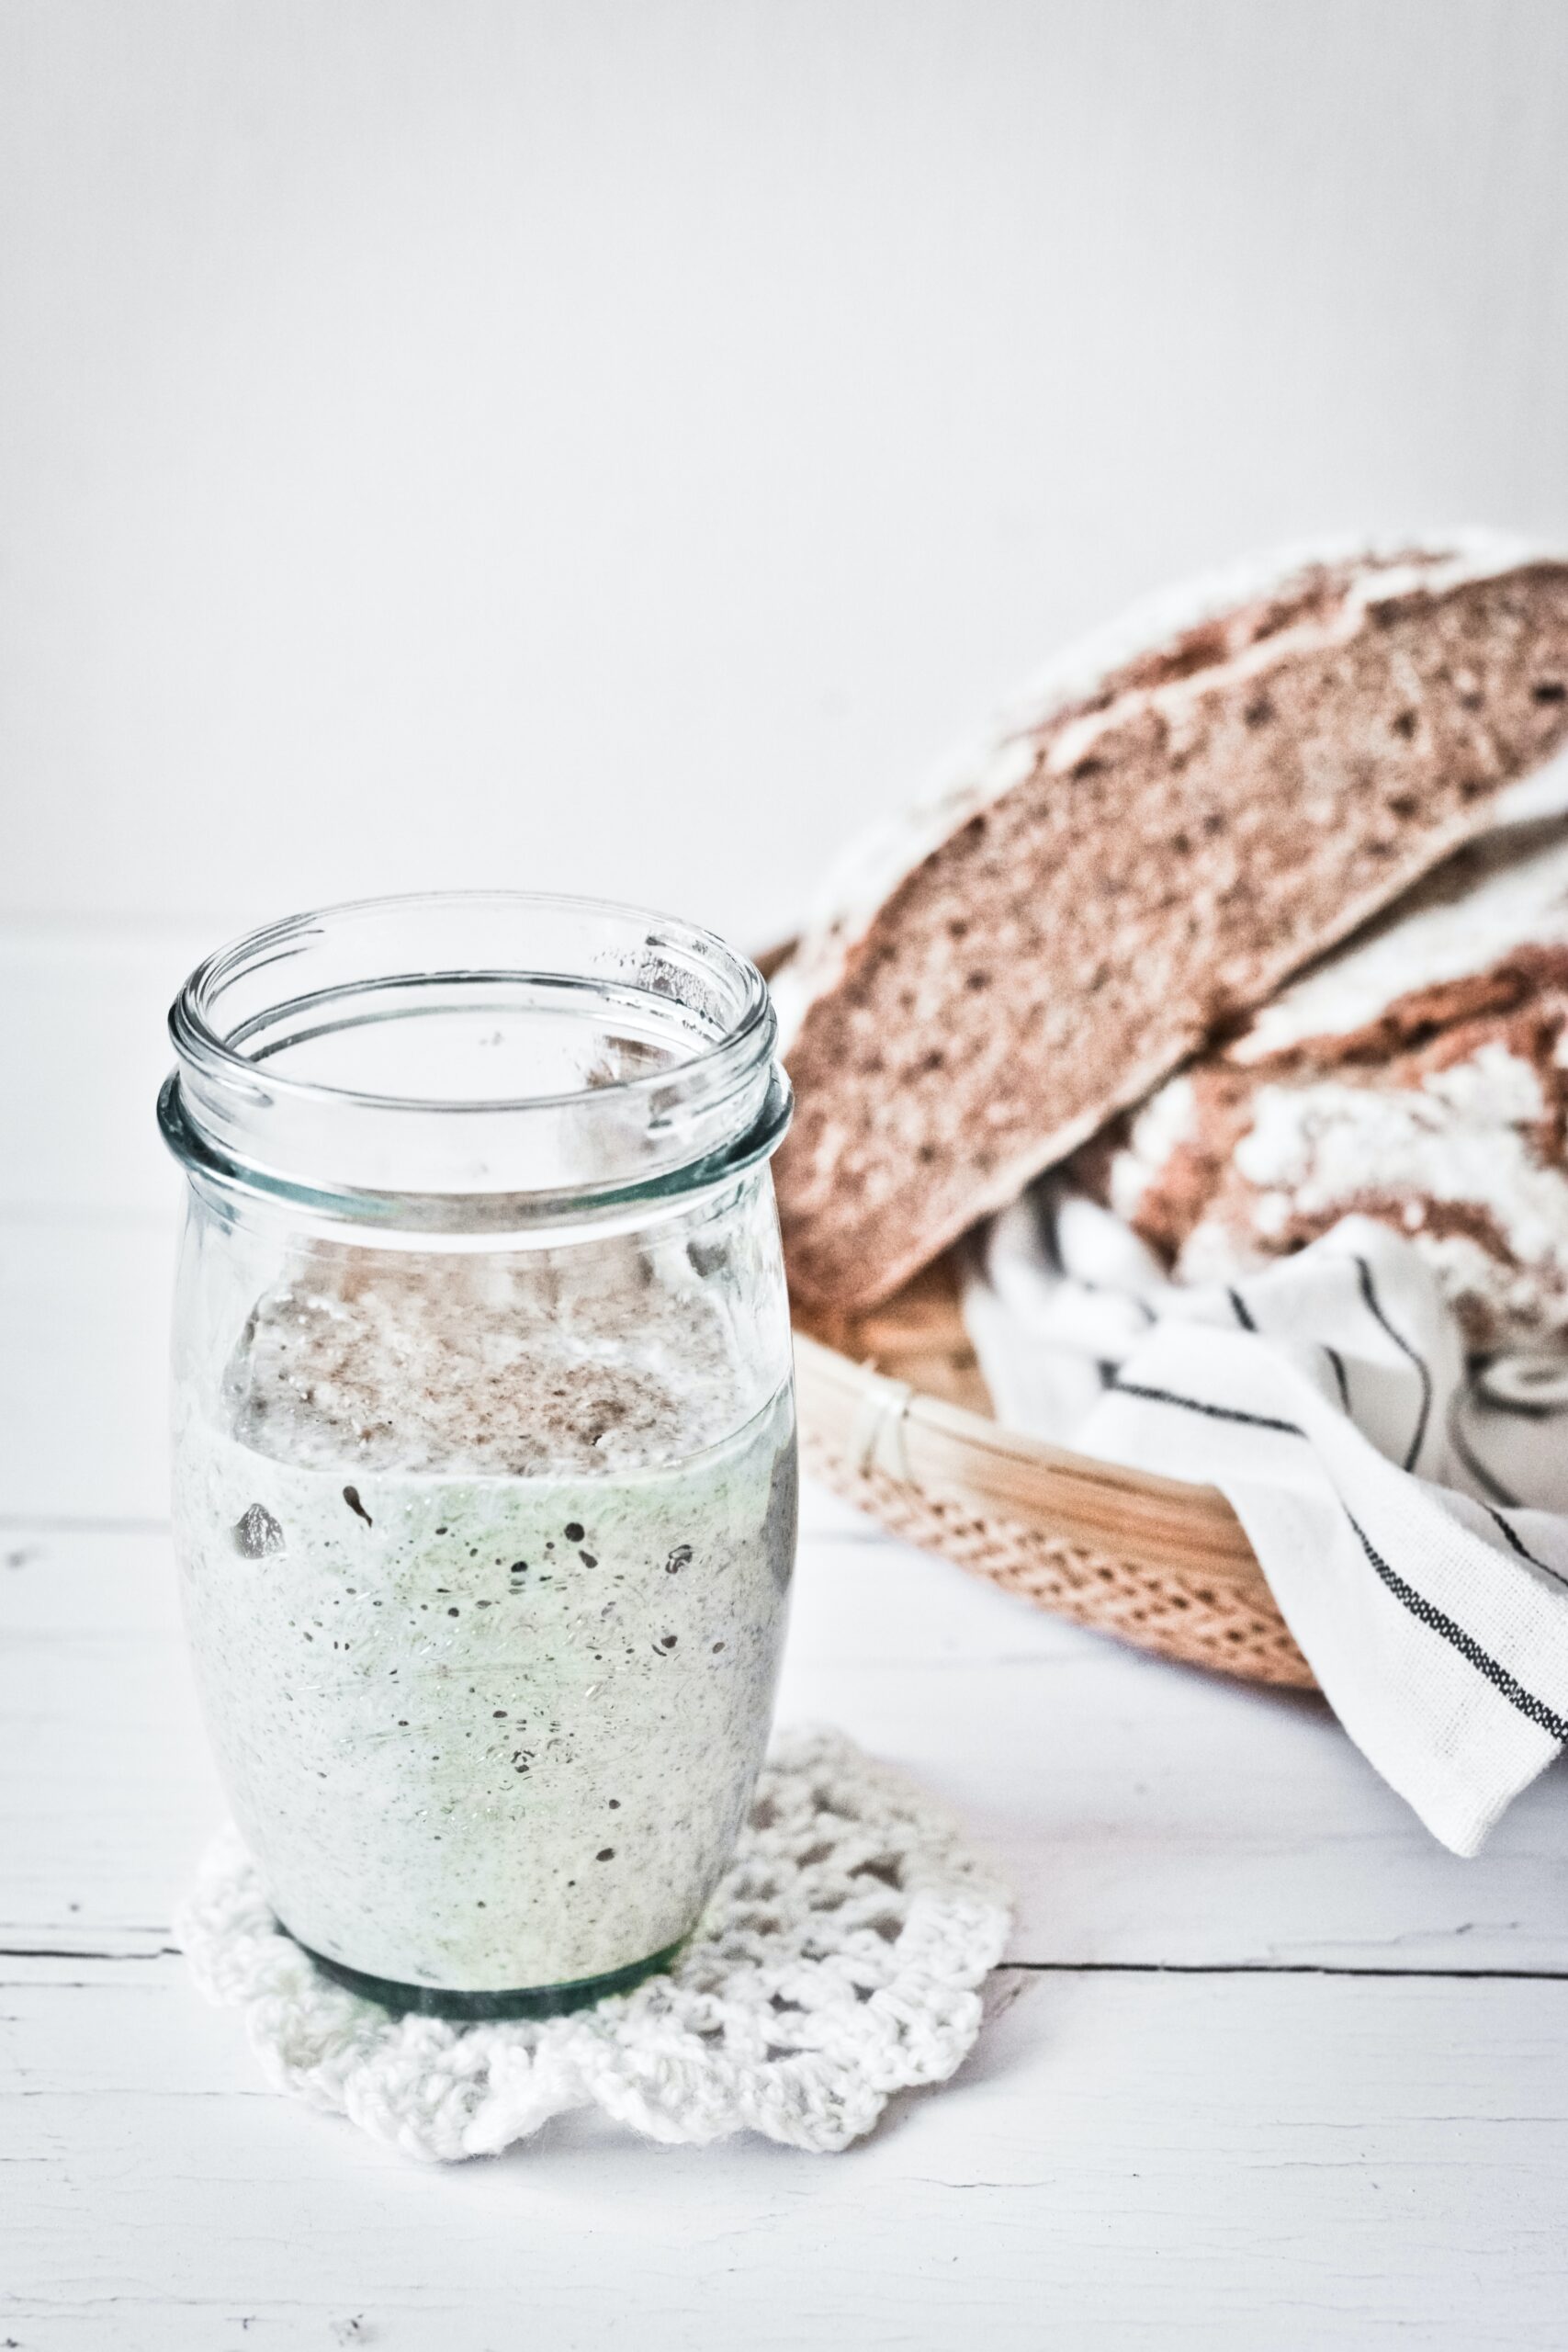 Other Uses for Your Sourdough Starter